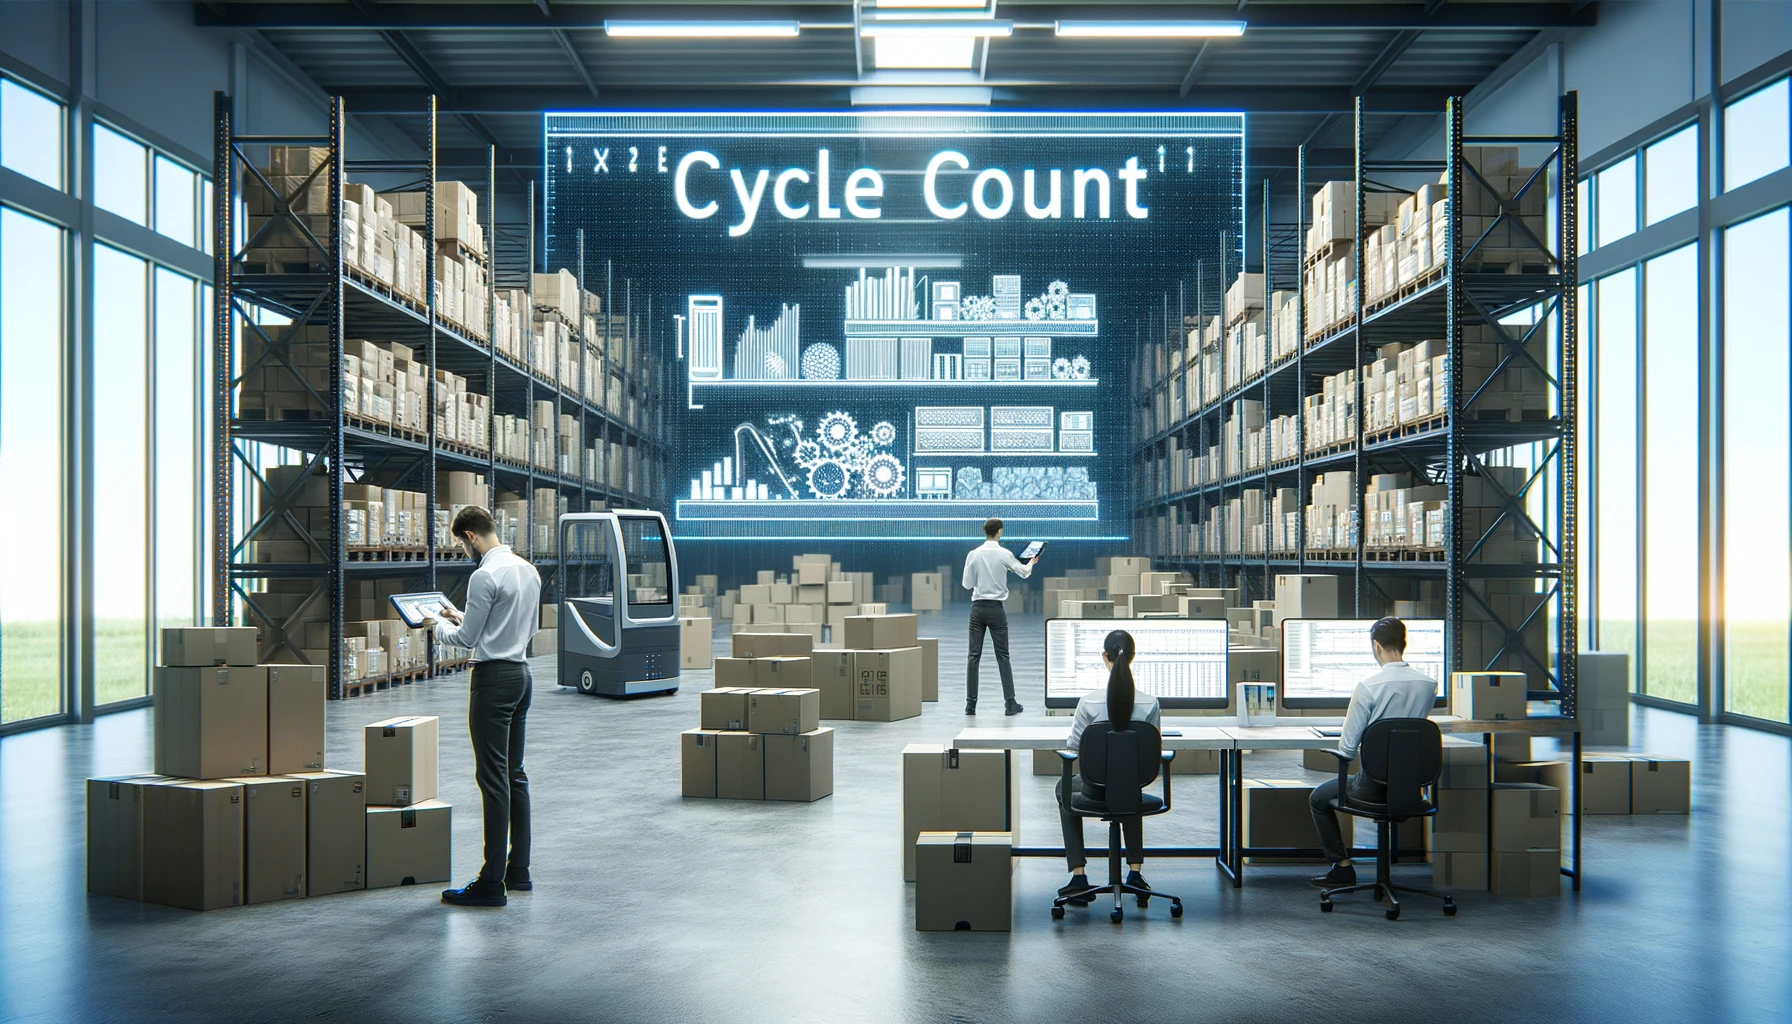 Interior of a modern, well-lit warehouse dedicated to 'Cycle Count' inventory management. The space is organized and free of any desks, tables, or computer equipment. It features workers using handheld scanners among tall shelves stocked with boxes of various sizes and colors. The setting emphasizes an efficient and technologically advanced inventory process, with the term 'Cycle Count' prominently displayed and correctly spelled